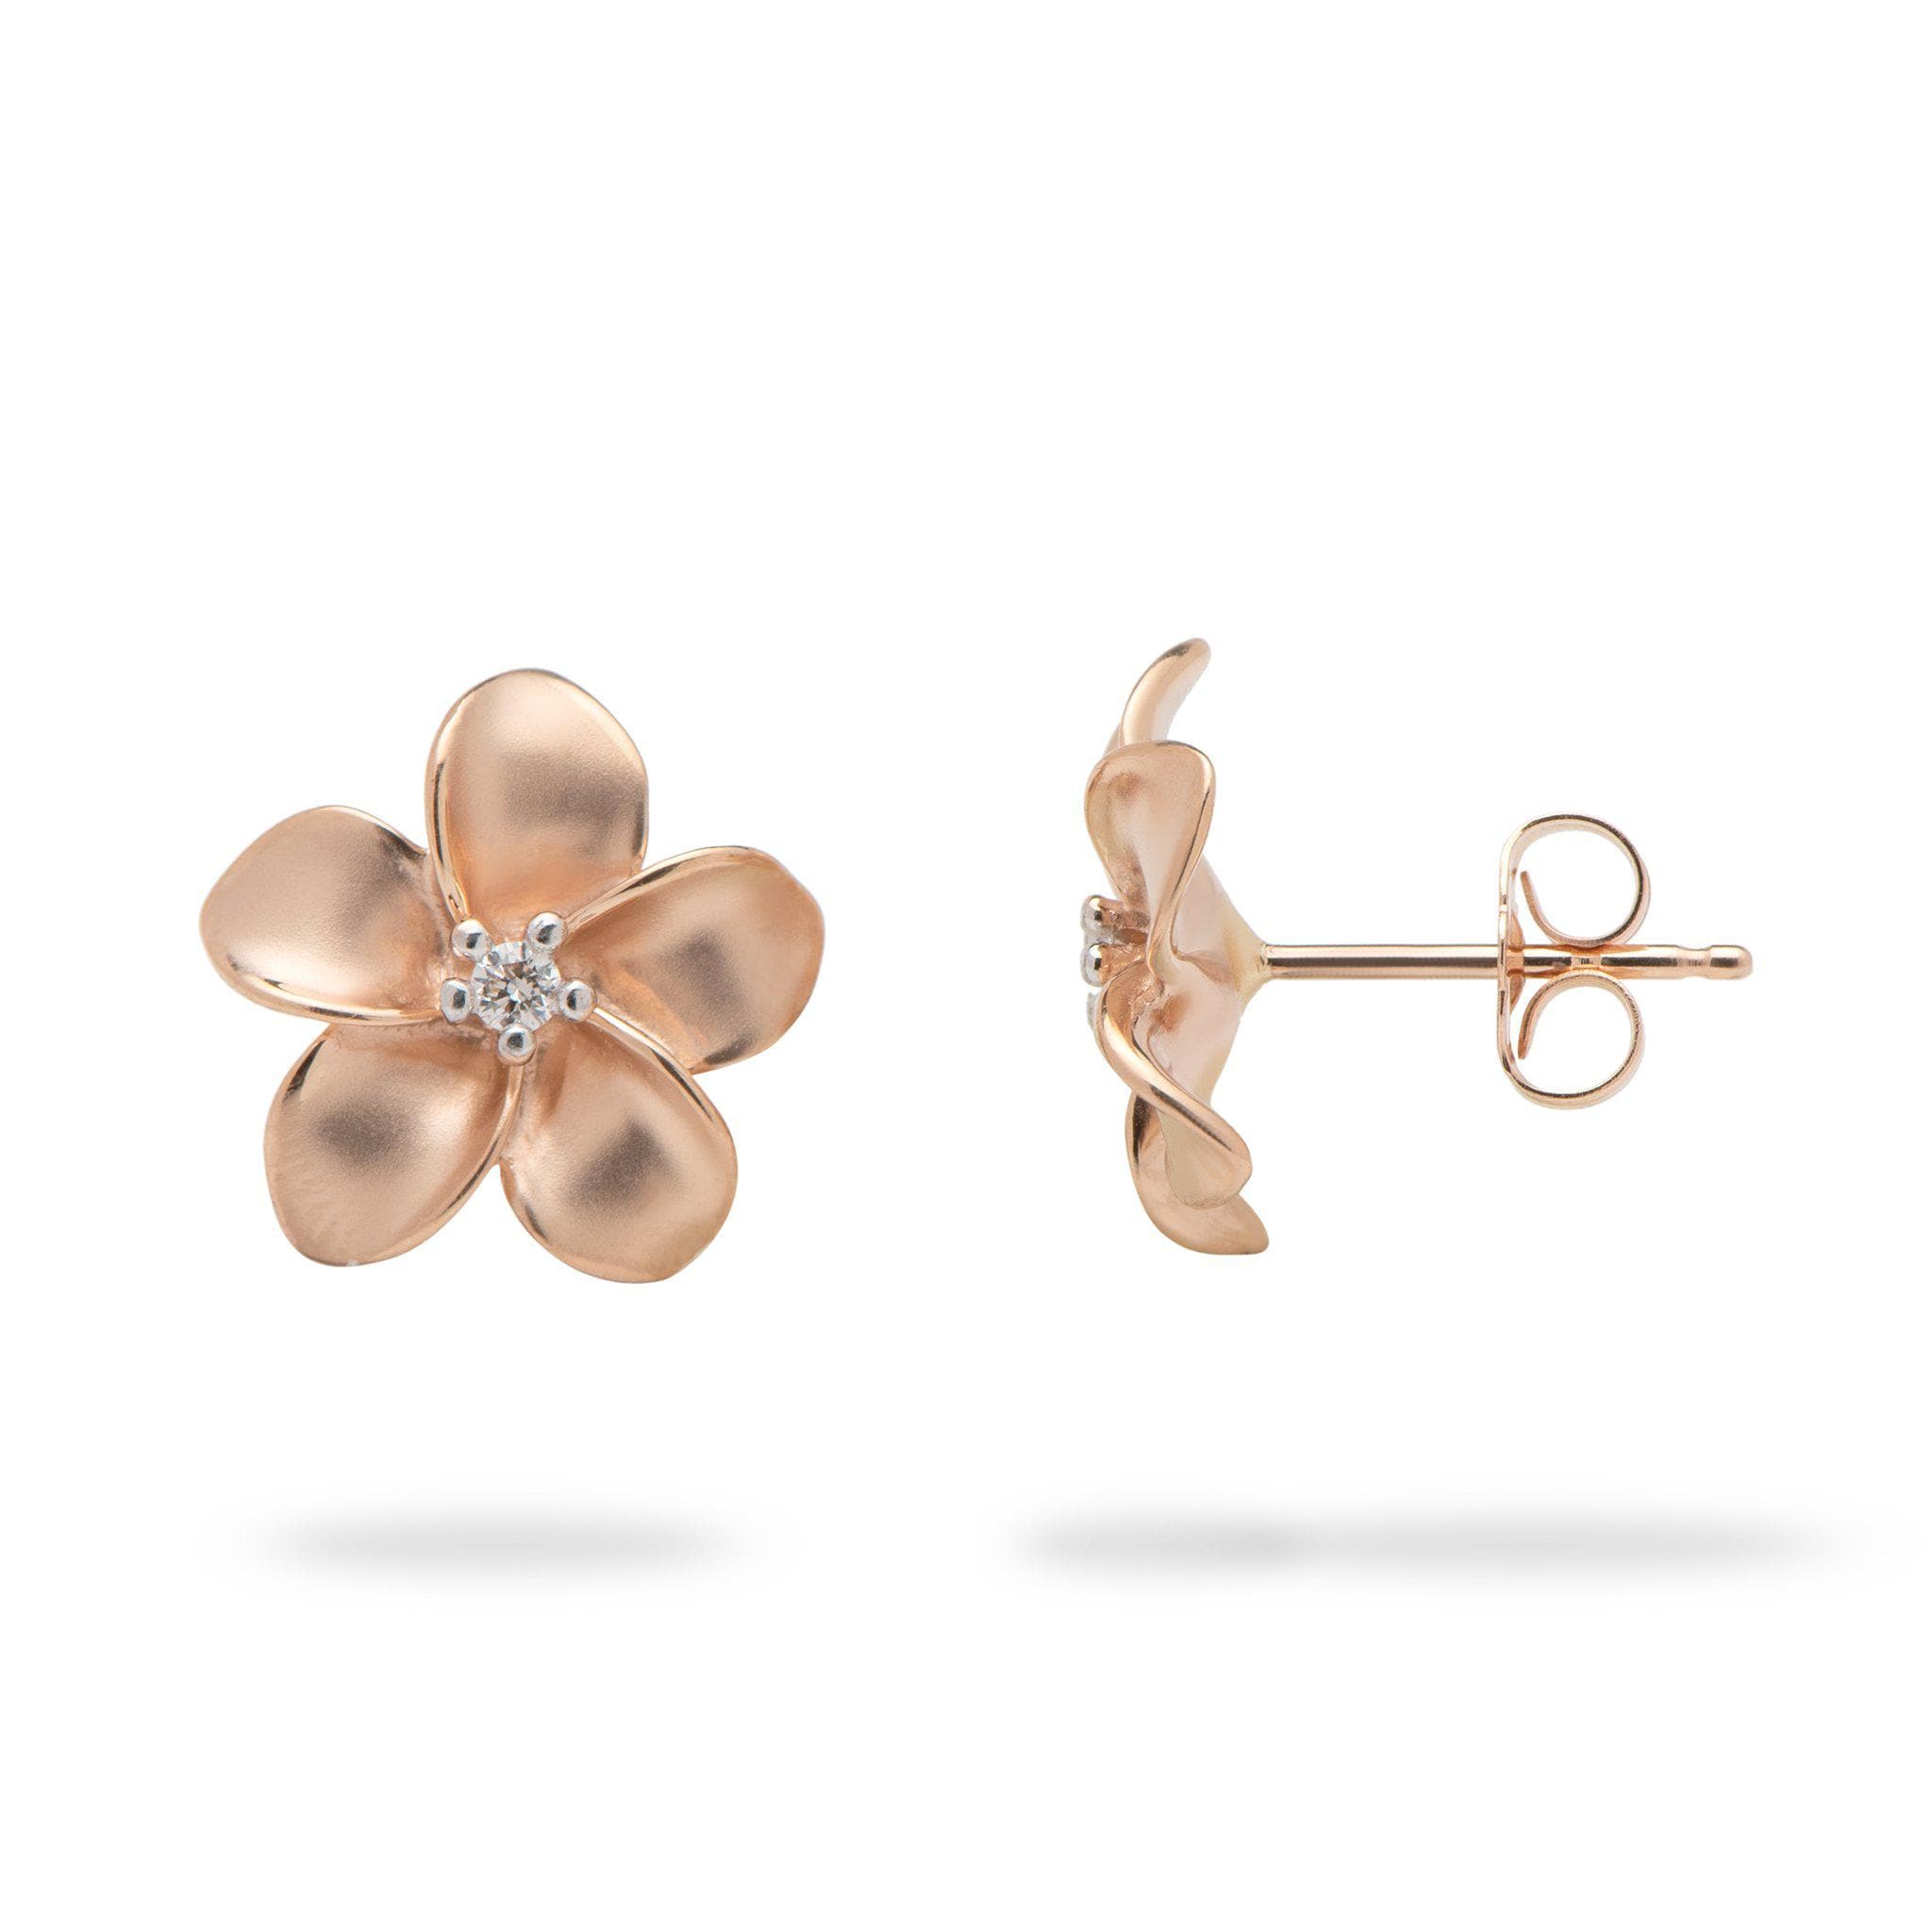 Plumeria Earrings in Rose Gold with Diamonds - 13mm